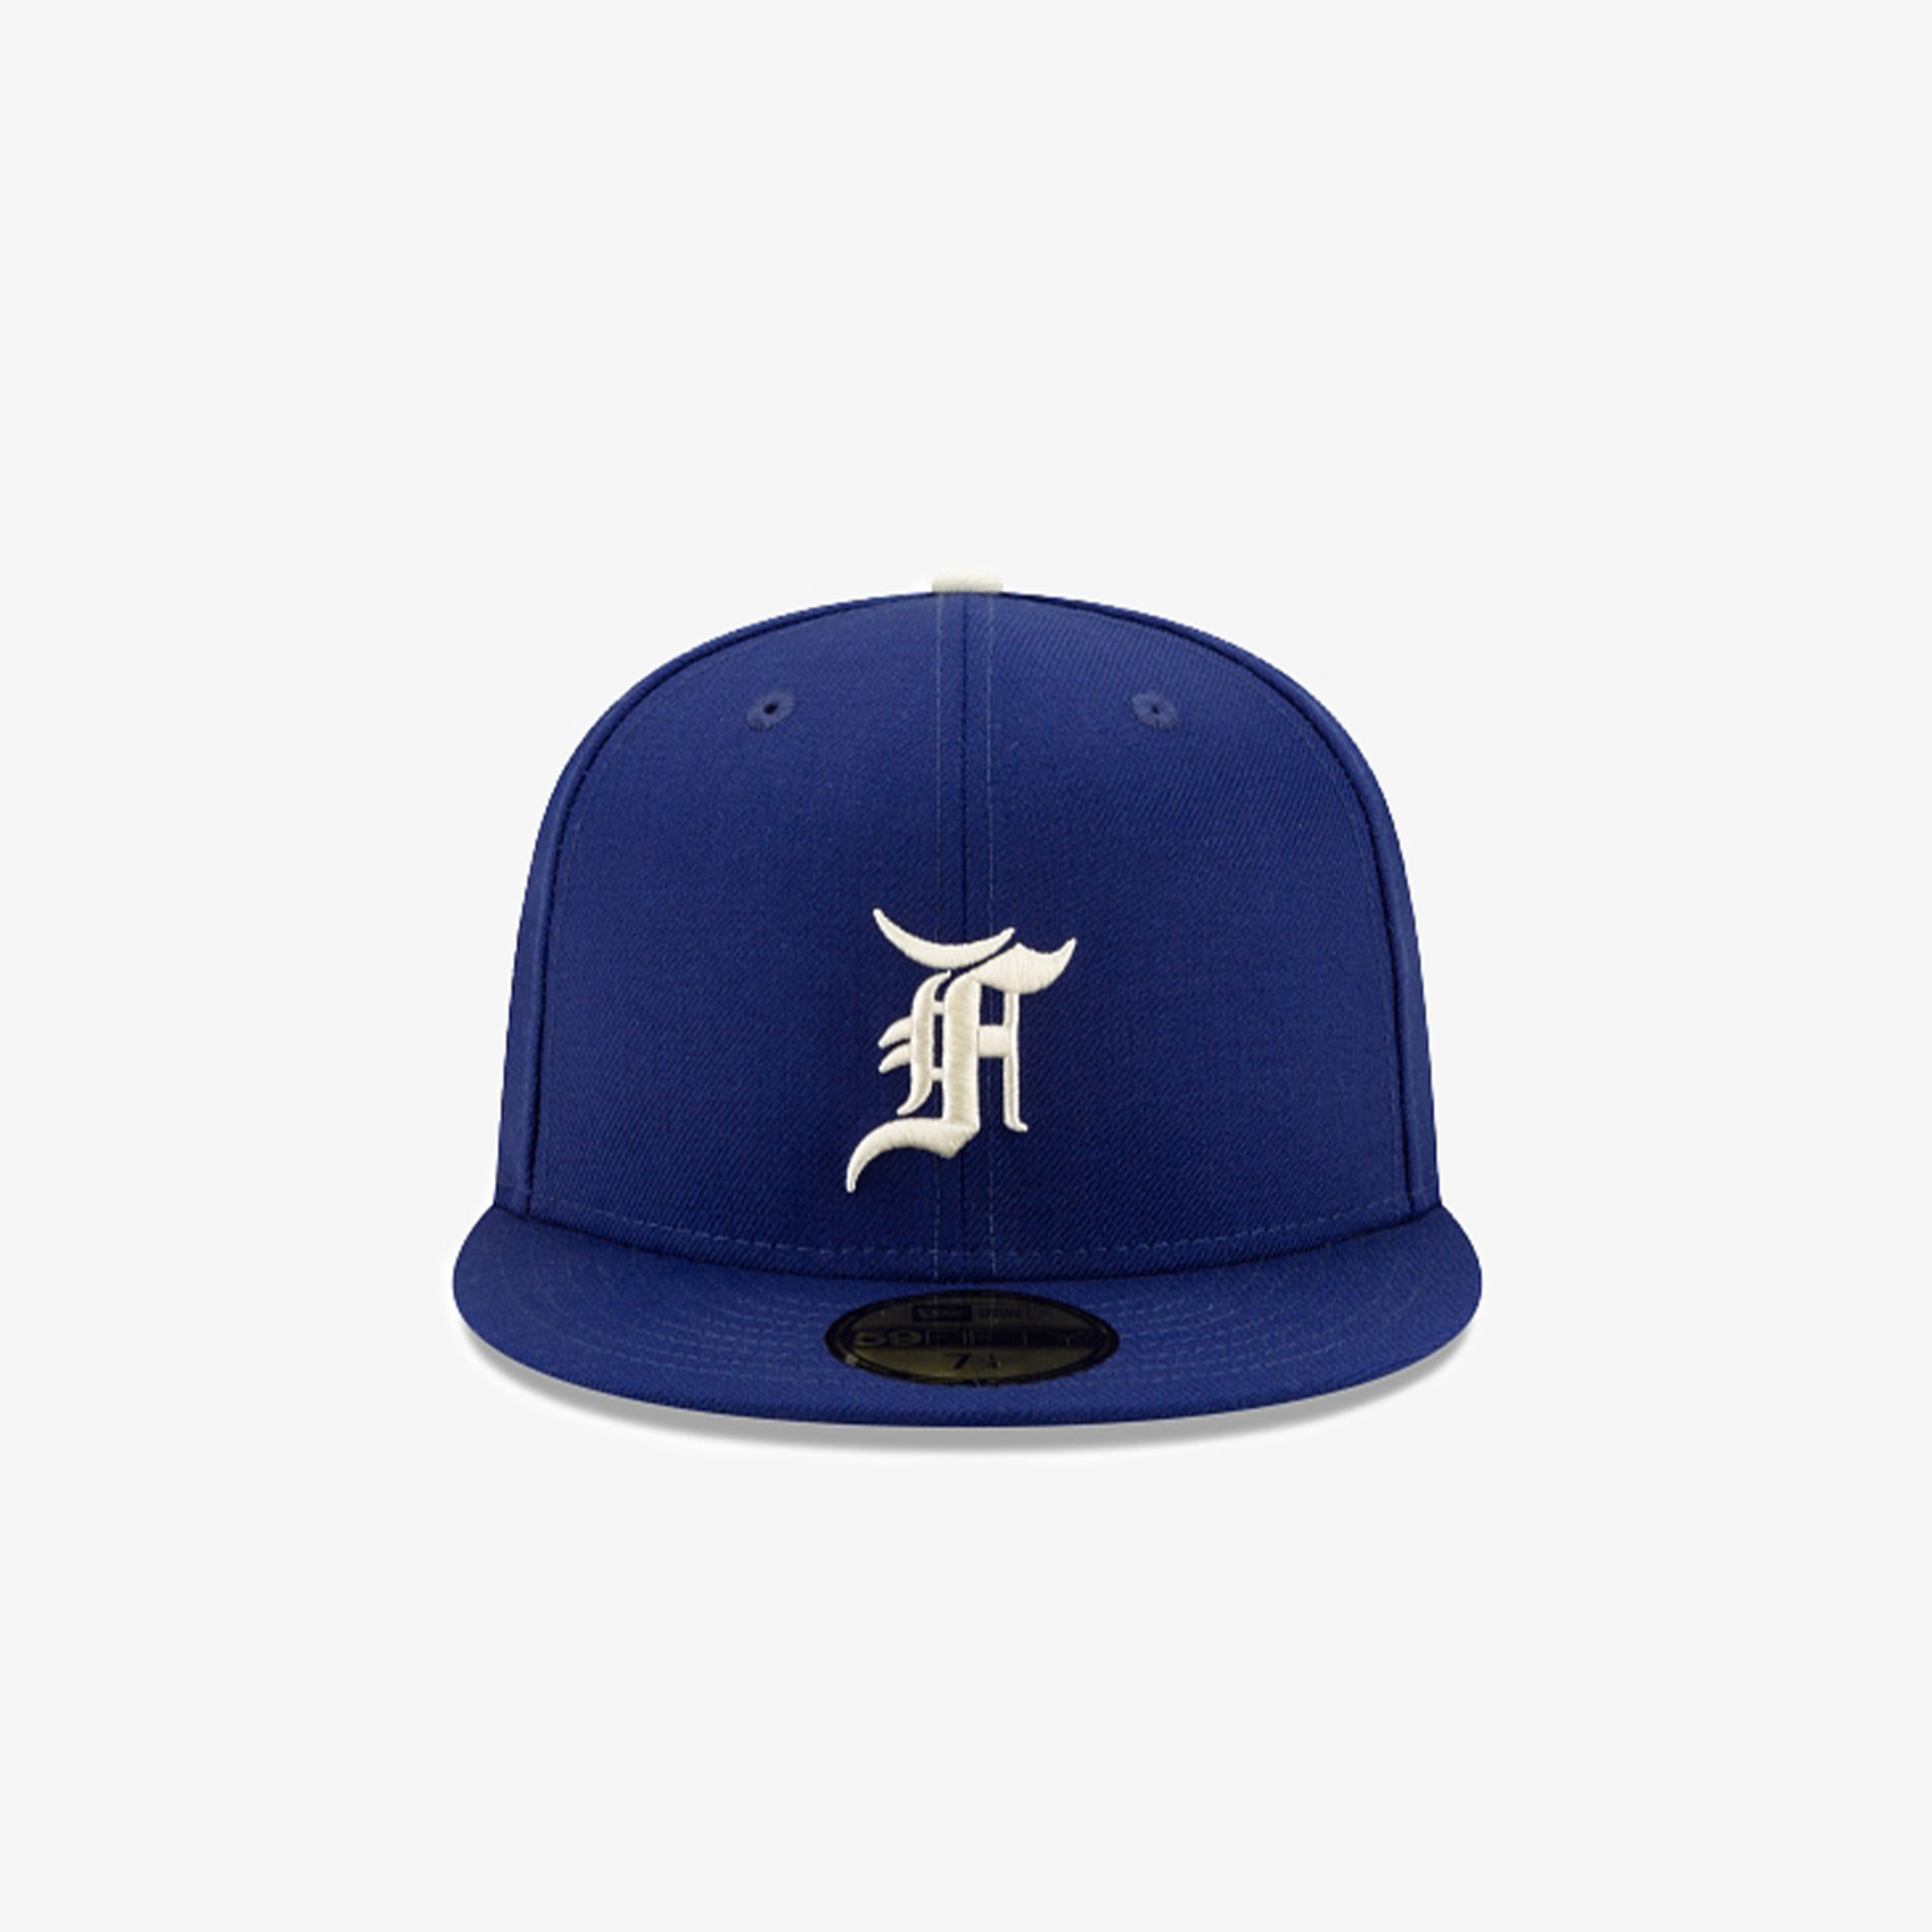 FEAR OF GOD NEW ERA 2020 WORLD SERIES PATCH FITTED